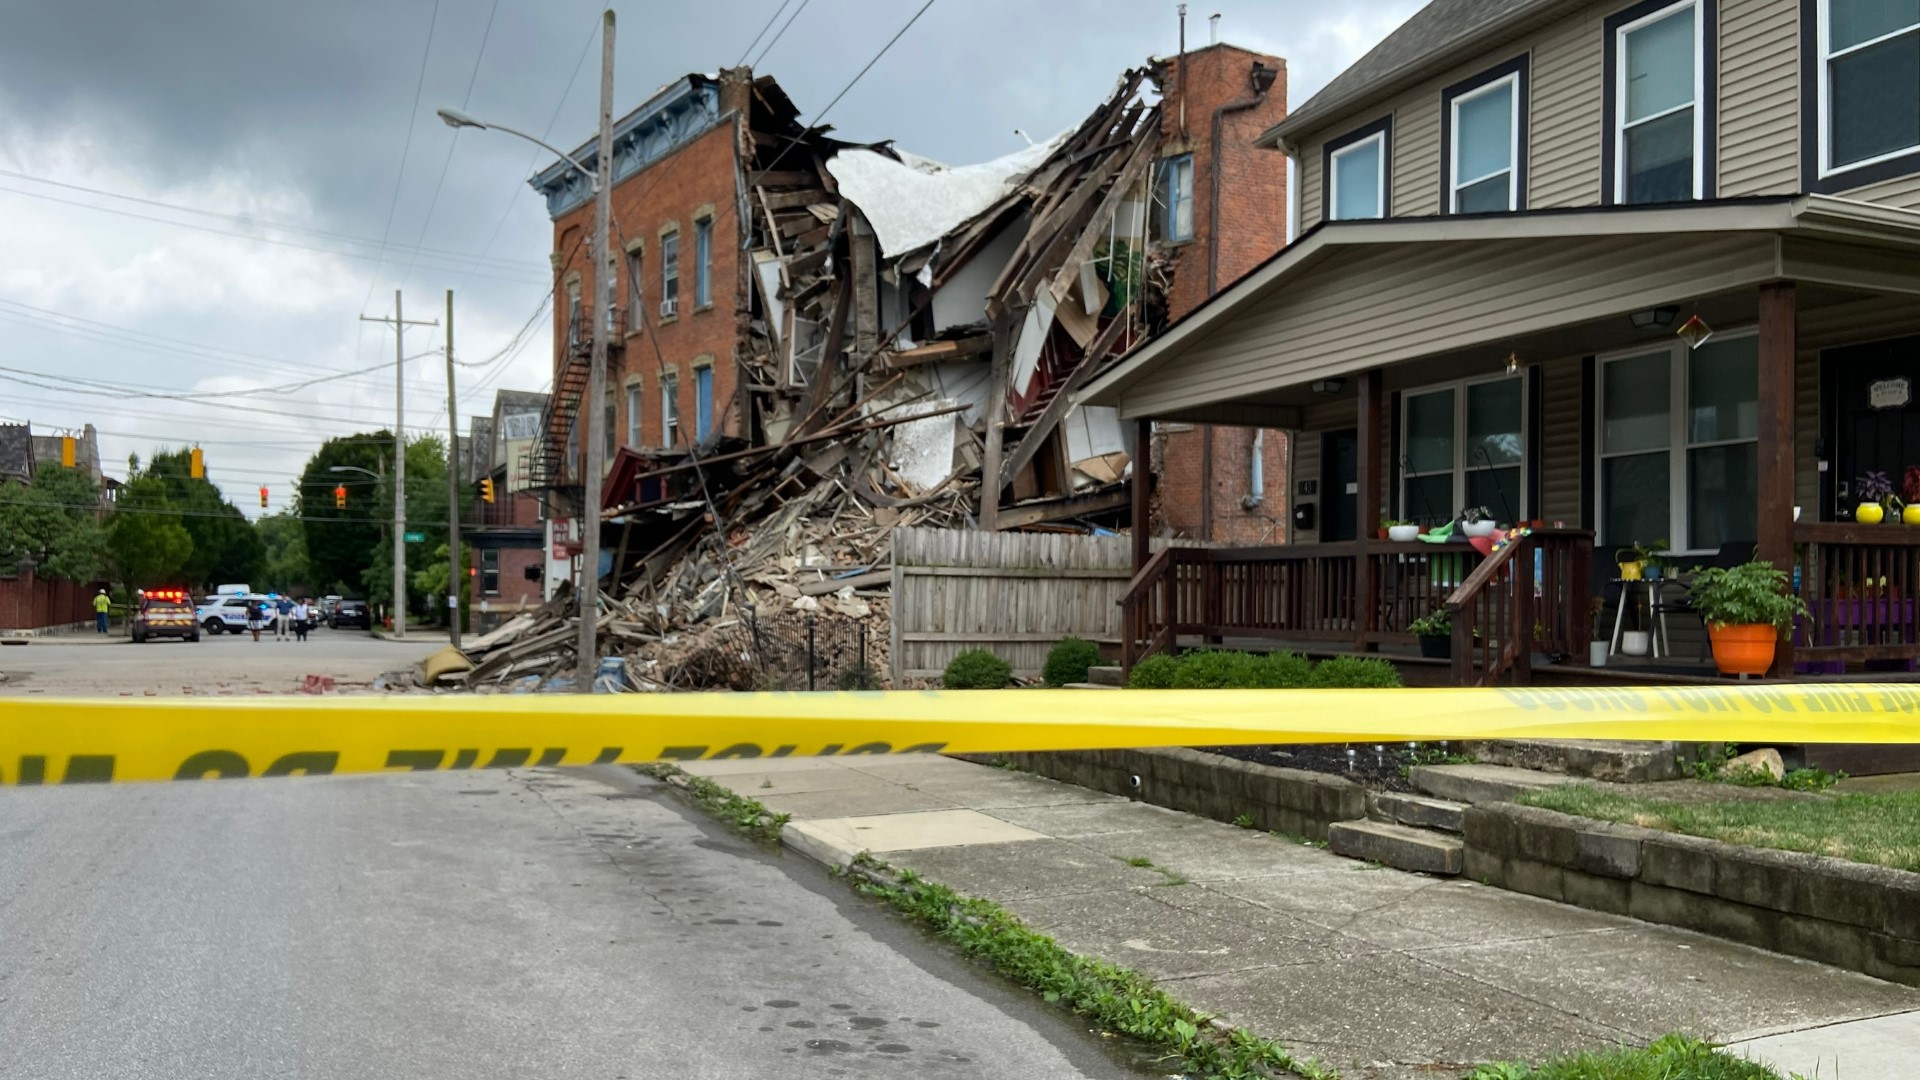 The city's chief building official has since issued an emergency order requiring the owner to demolition the building immediately.